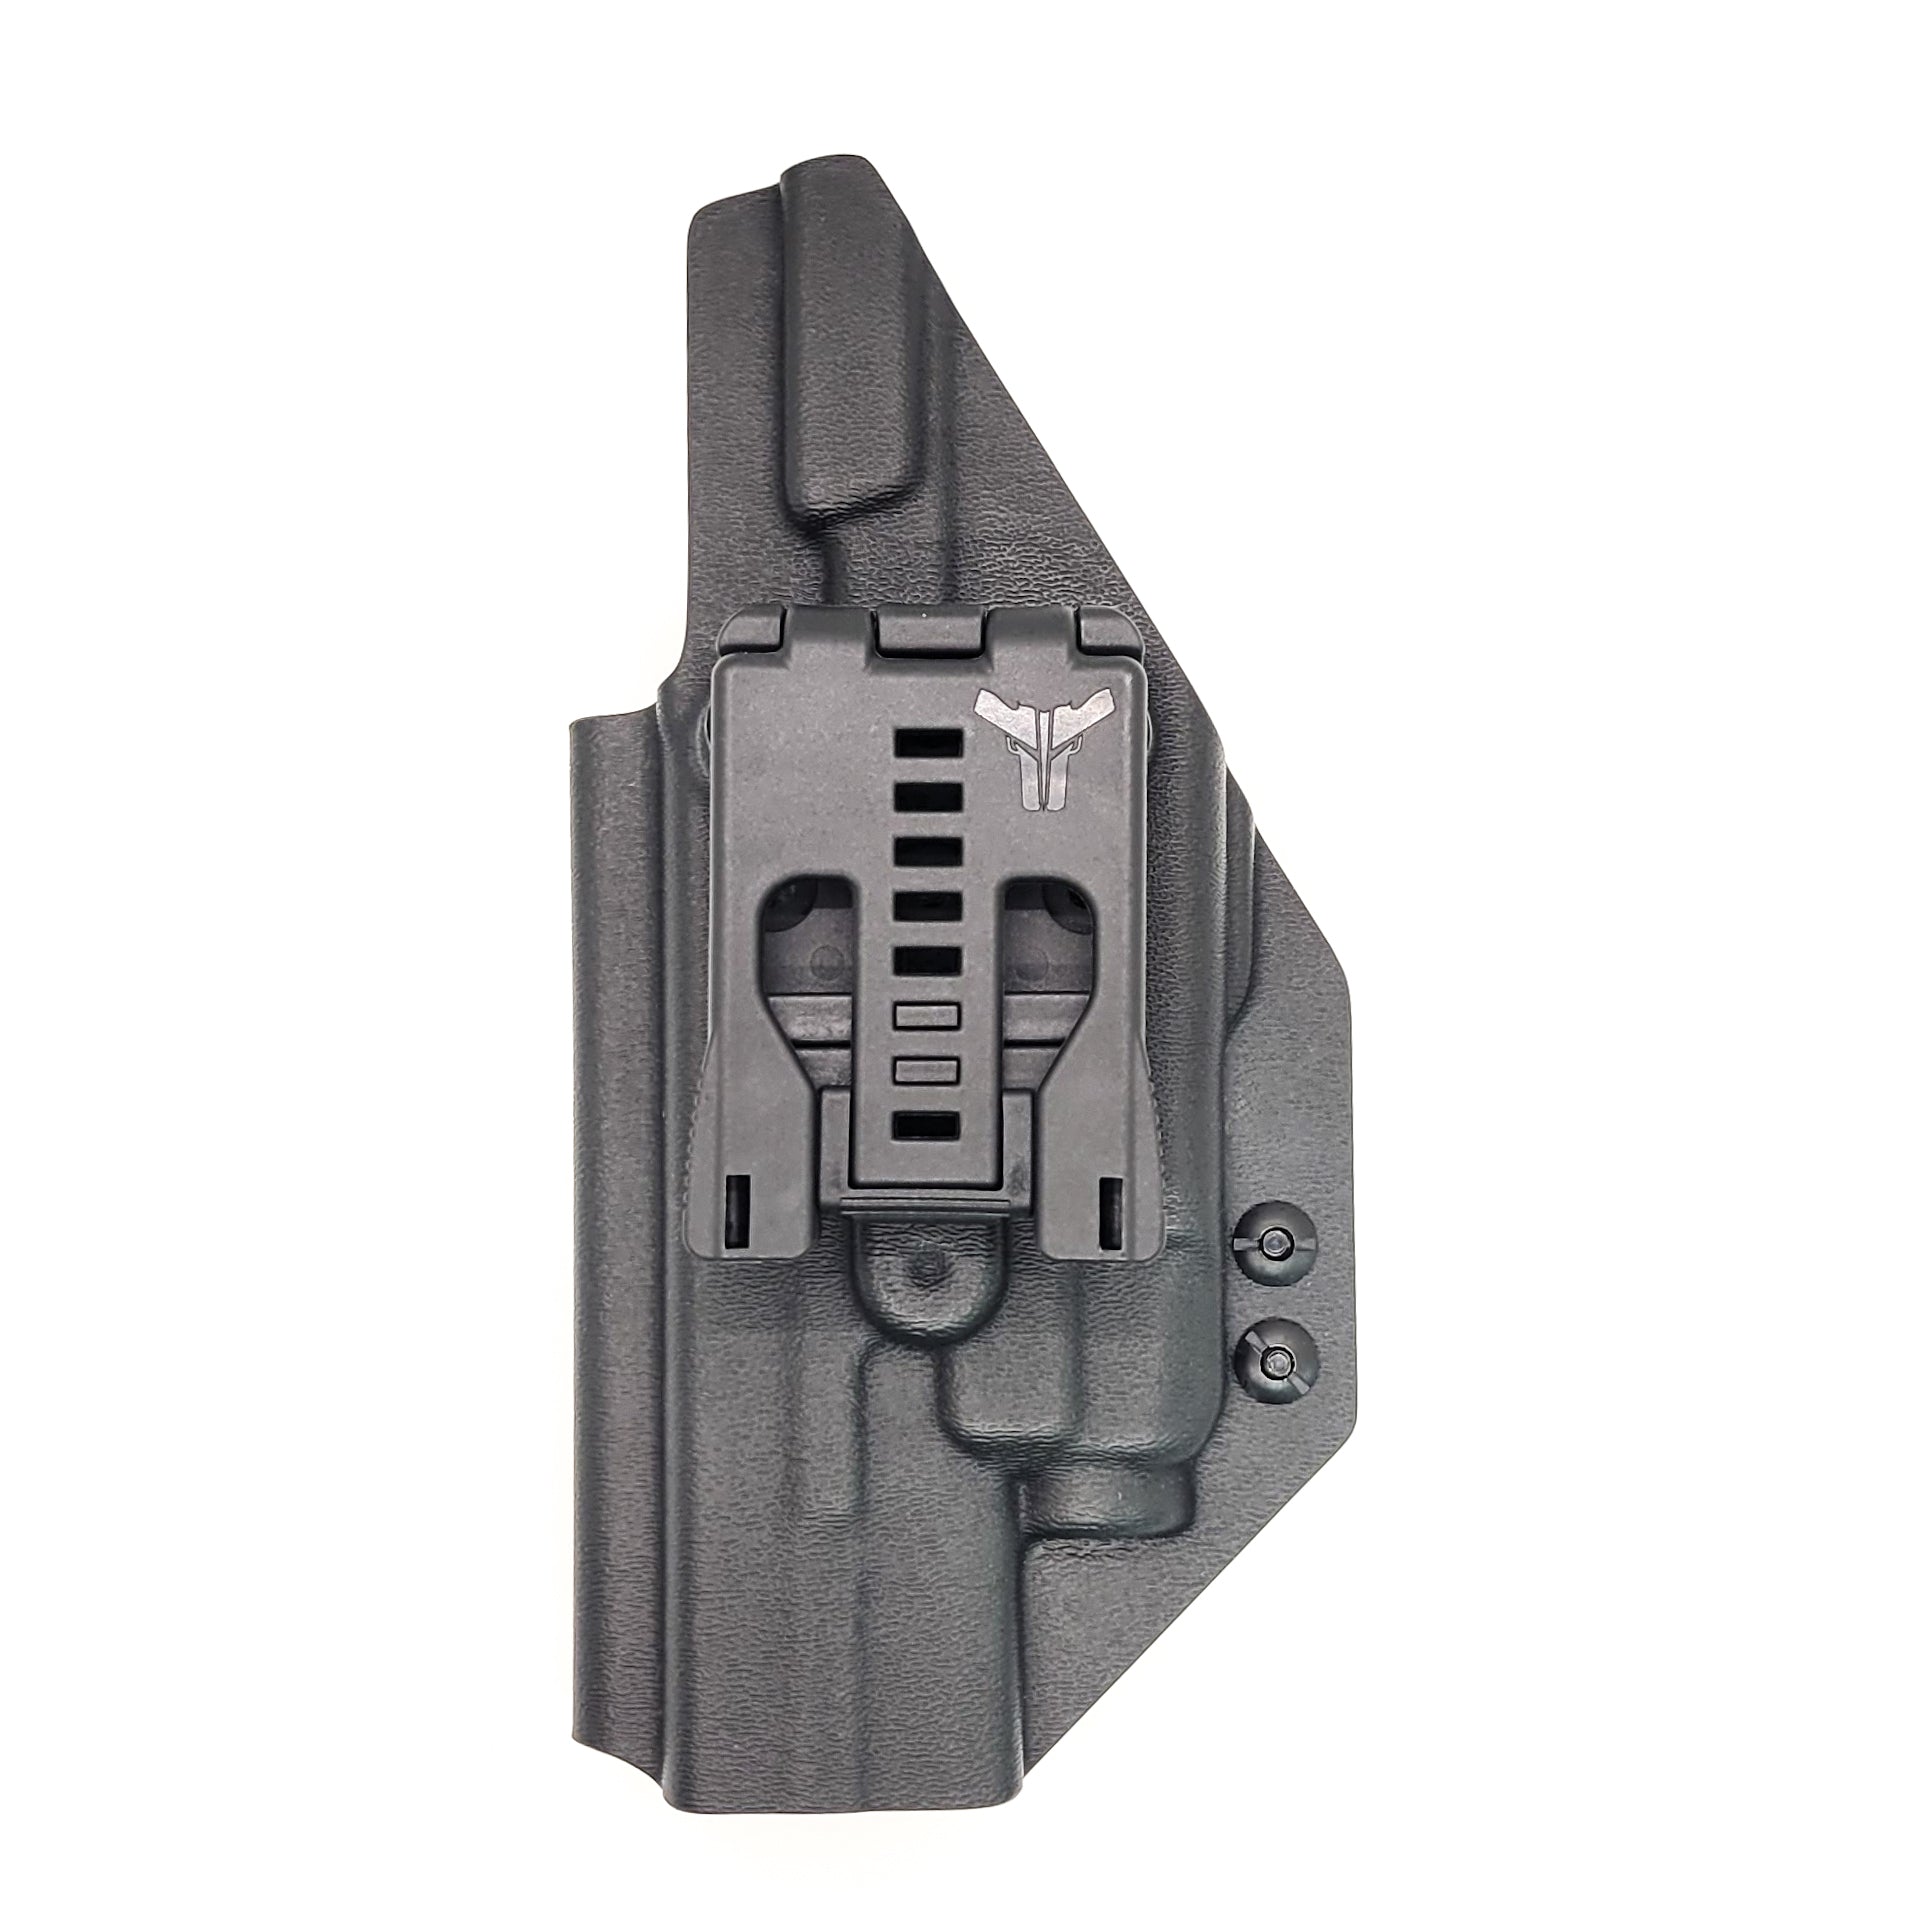 The best Outside Waistband OWB Kydex Holster designed to fit the Smith & Wesson M&P M2.0 5" pistols with the Streamlight TLR-7 or TLR-7A light mounted to the pistol. Full sweat guard, adjustable retention, minimal material, and smooth edges to reduce printing. Cleared for red dot sights. Proudly made in the USA.